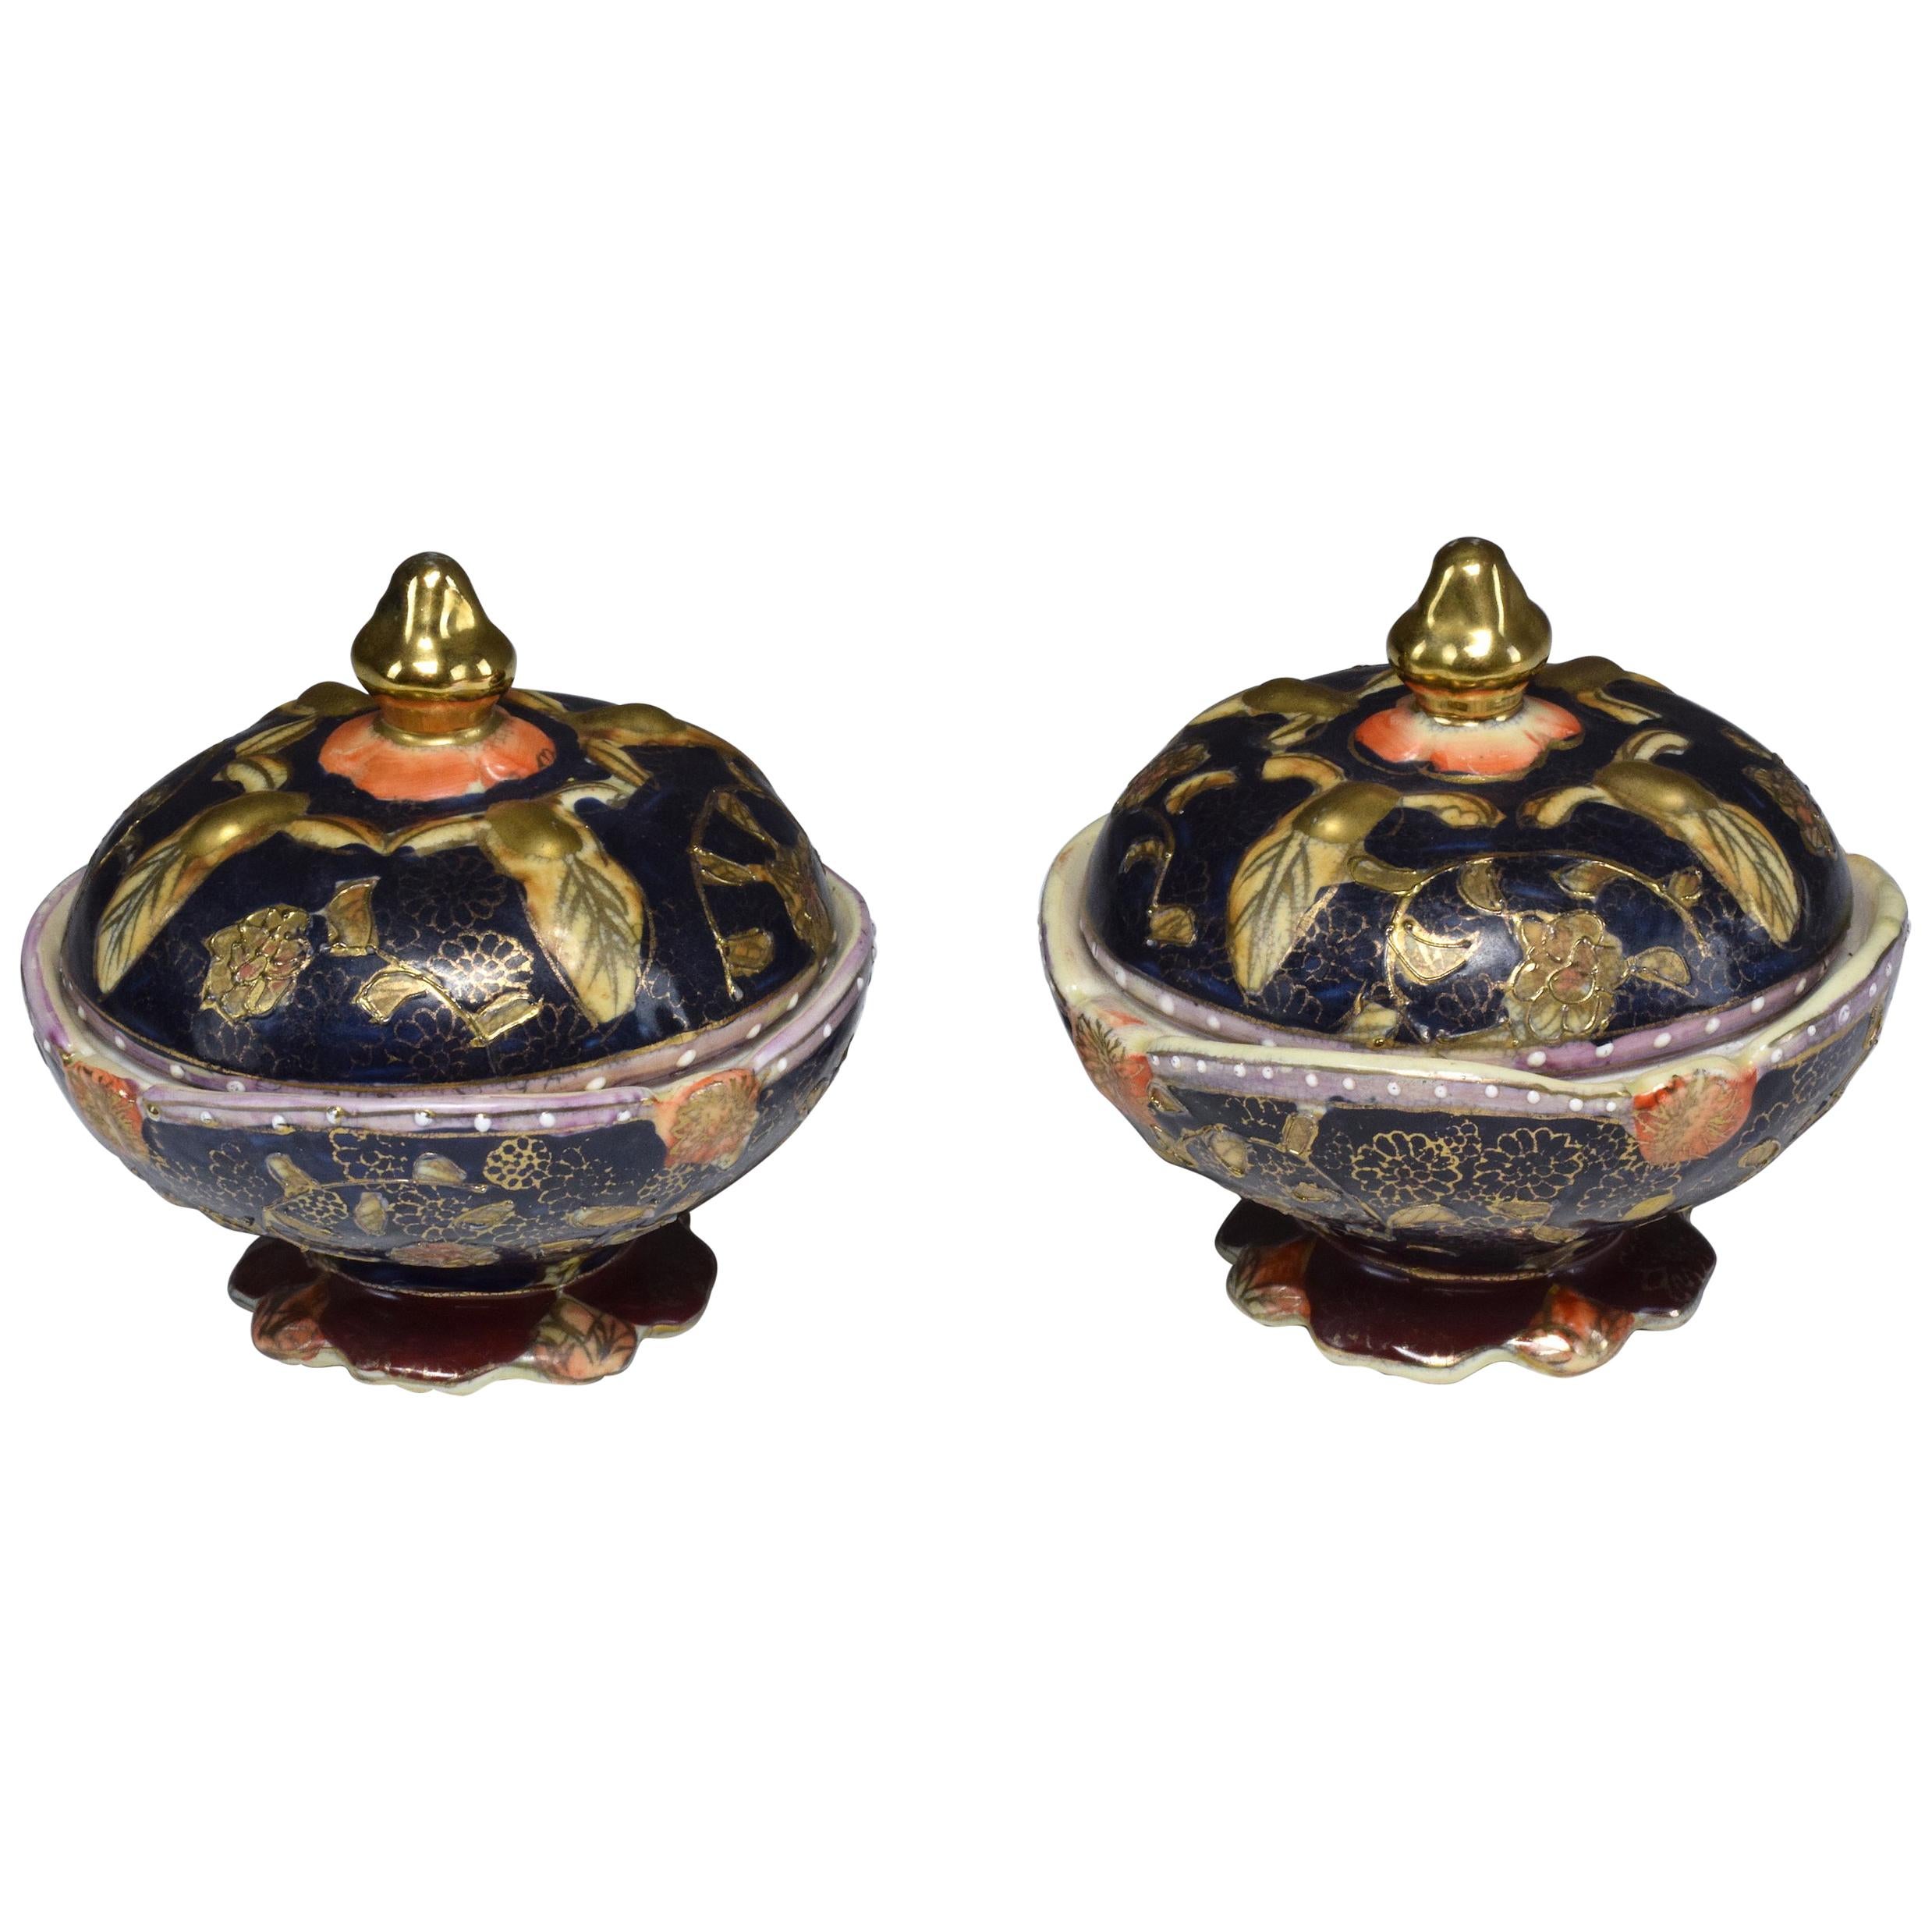 Pair of Antique Japanese Meiji Period Porcelain Trinket or Jewelry Boxes